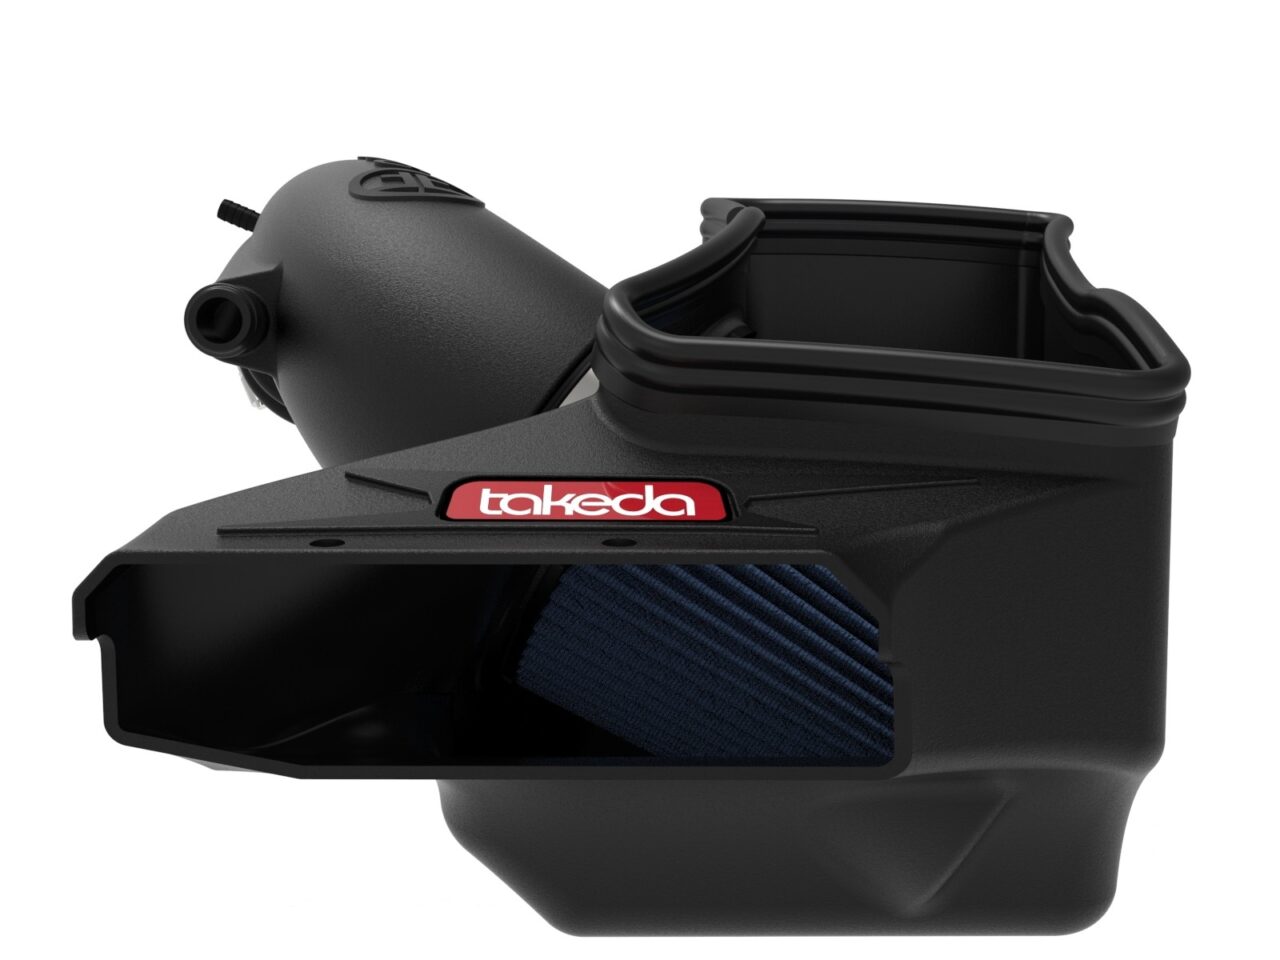 Takeda aFe aftermarket Intake with air coming in front behind front grille